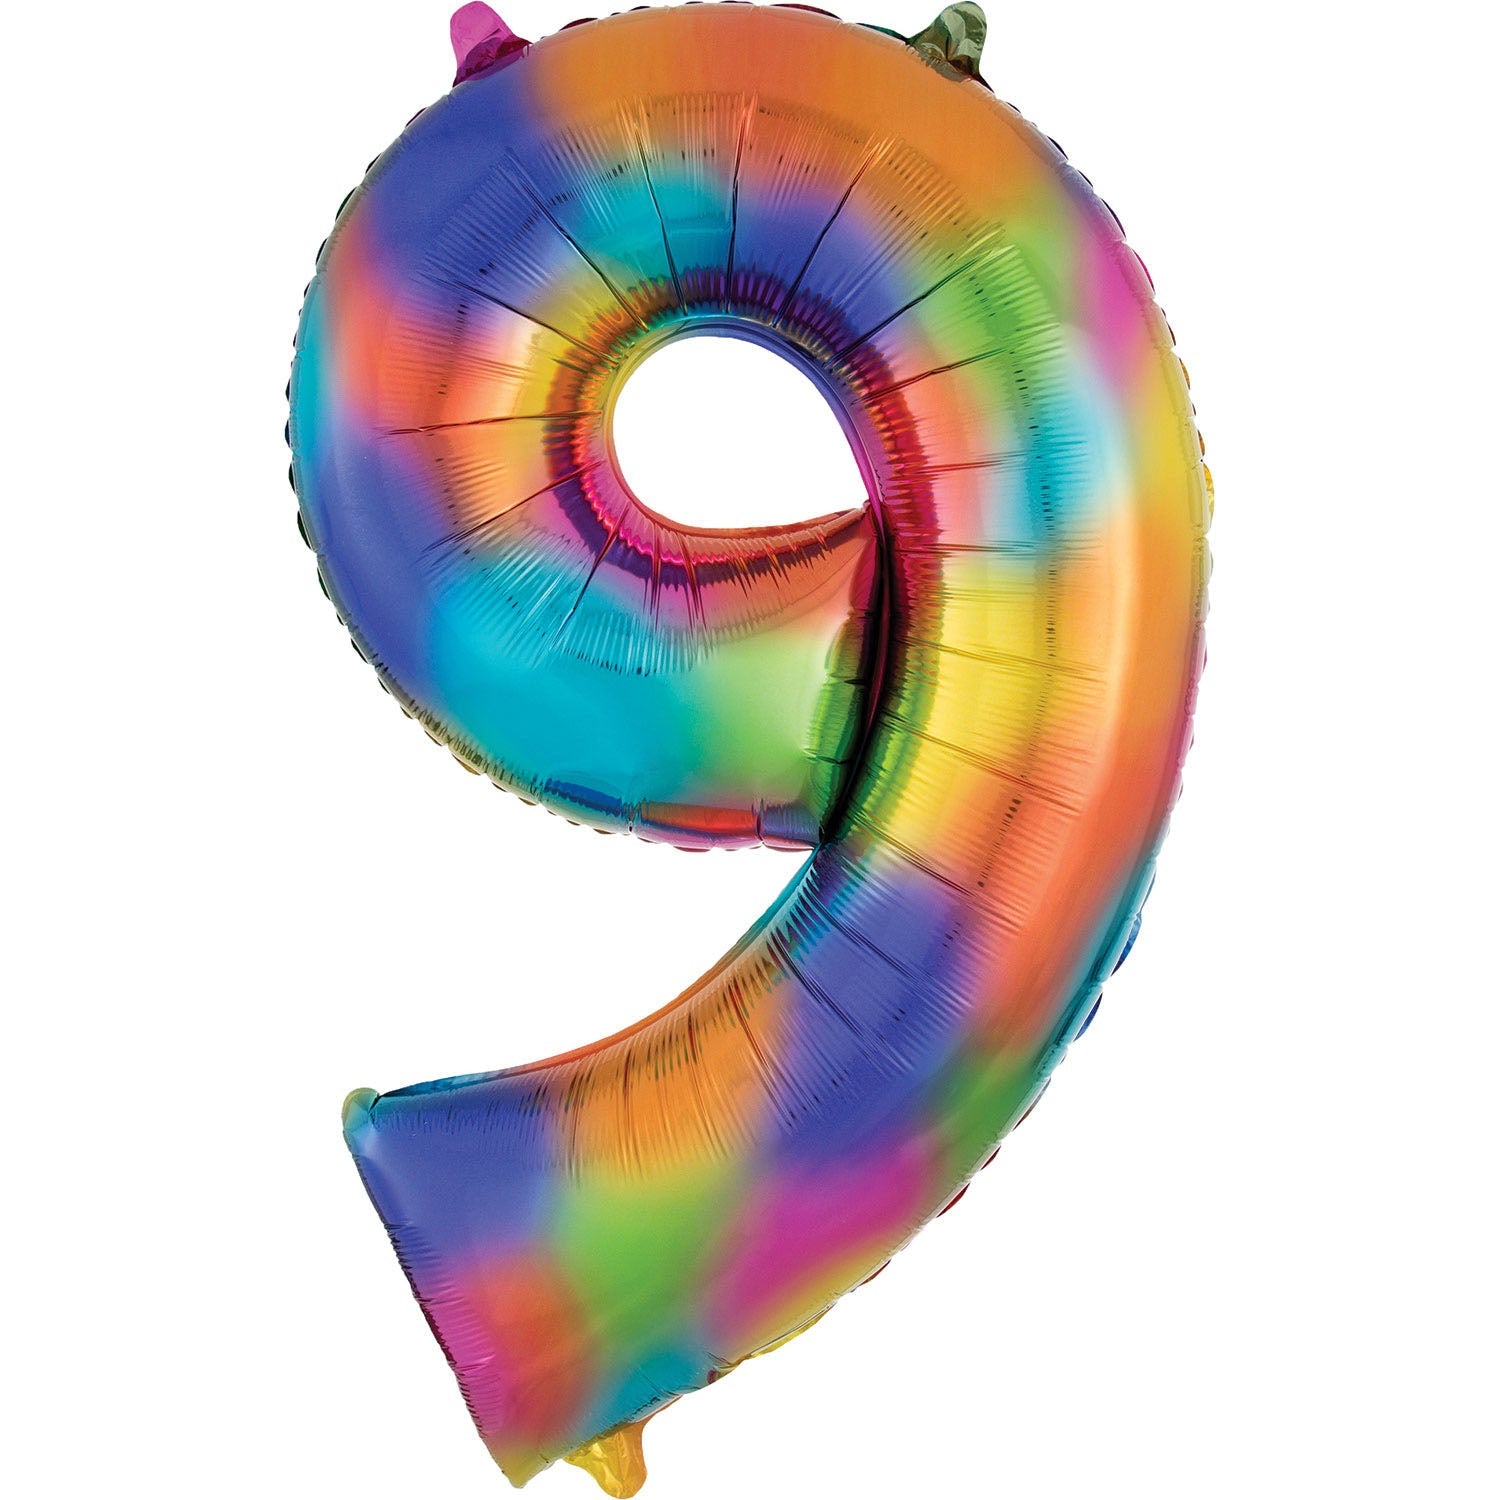 Rainbow Splash Supershape Number 9 Foil Balloon 86cm (34in) height by 55cm (22in) width Balloon is sold uninflated. Can be inflated with air or helium.